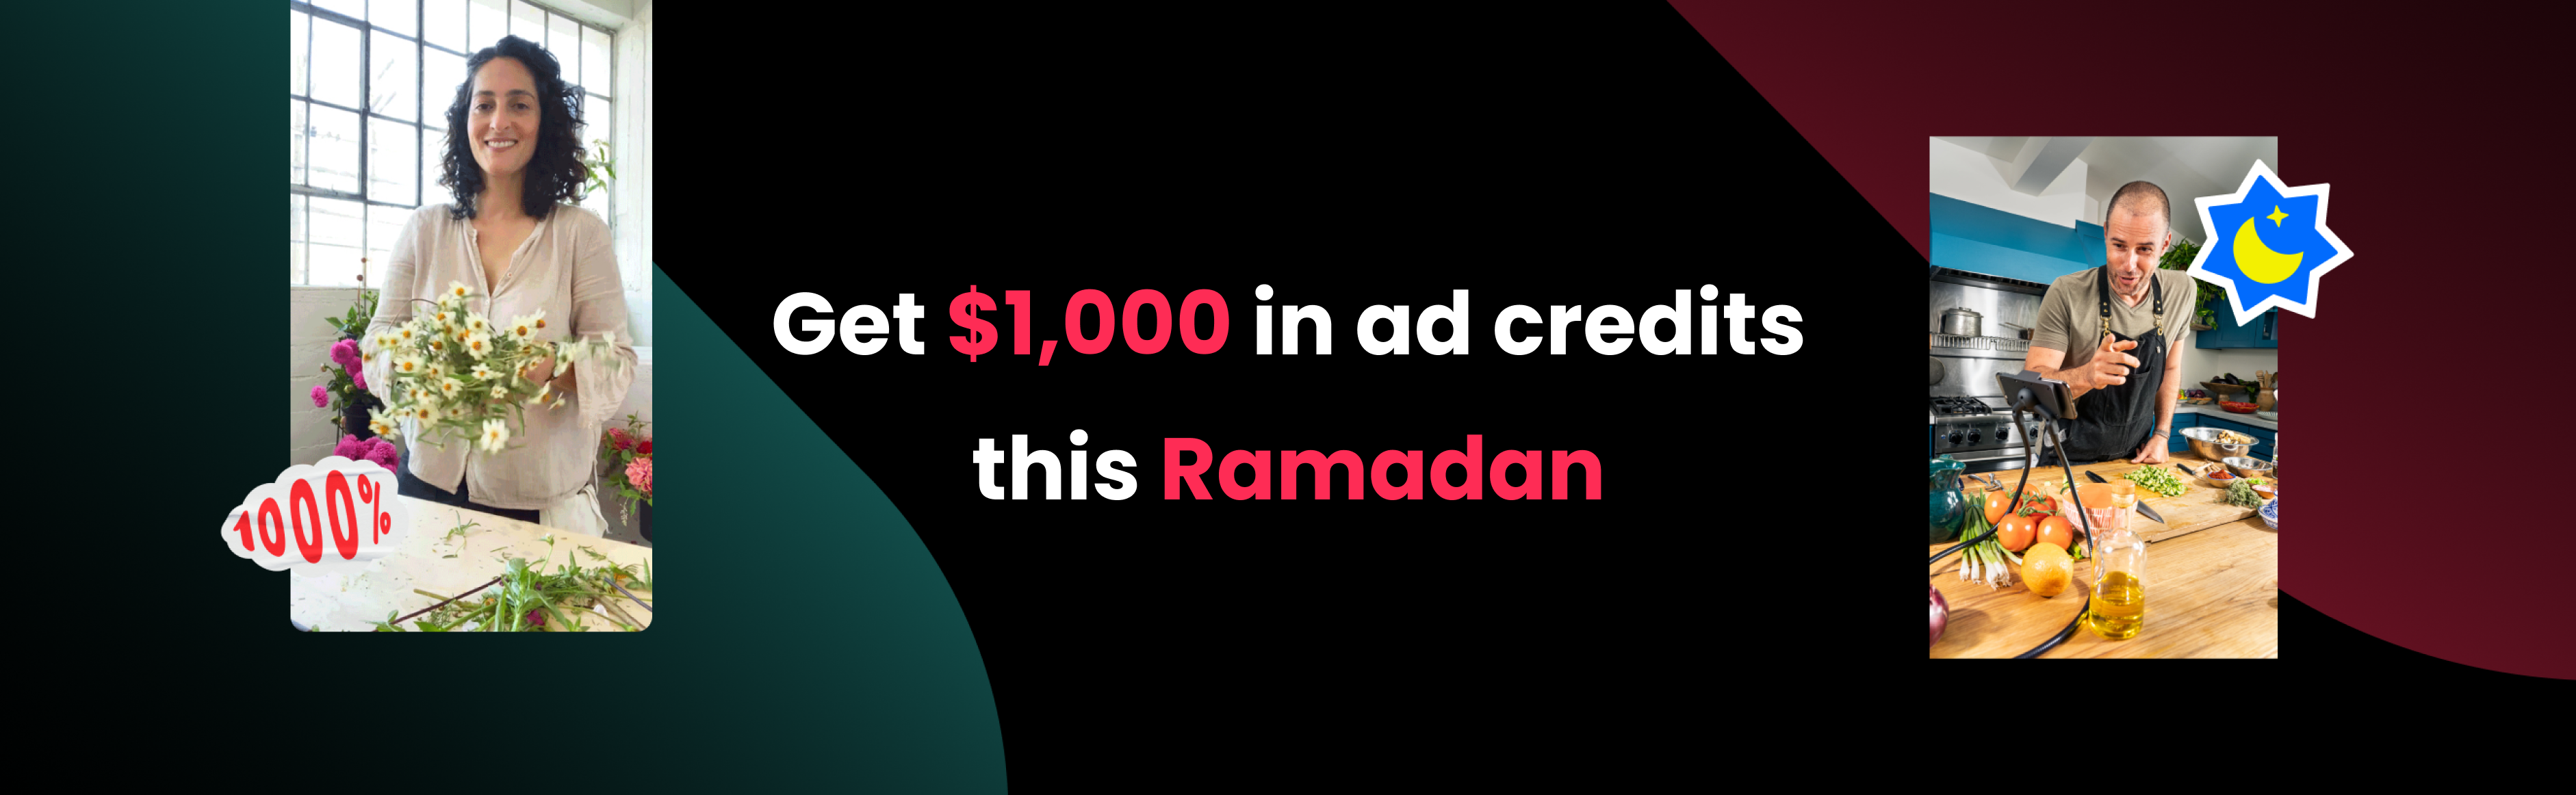 Get $1000 in ad credits this Ramadan